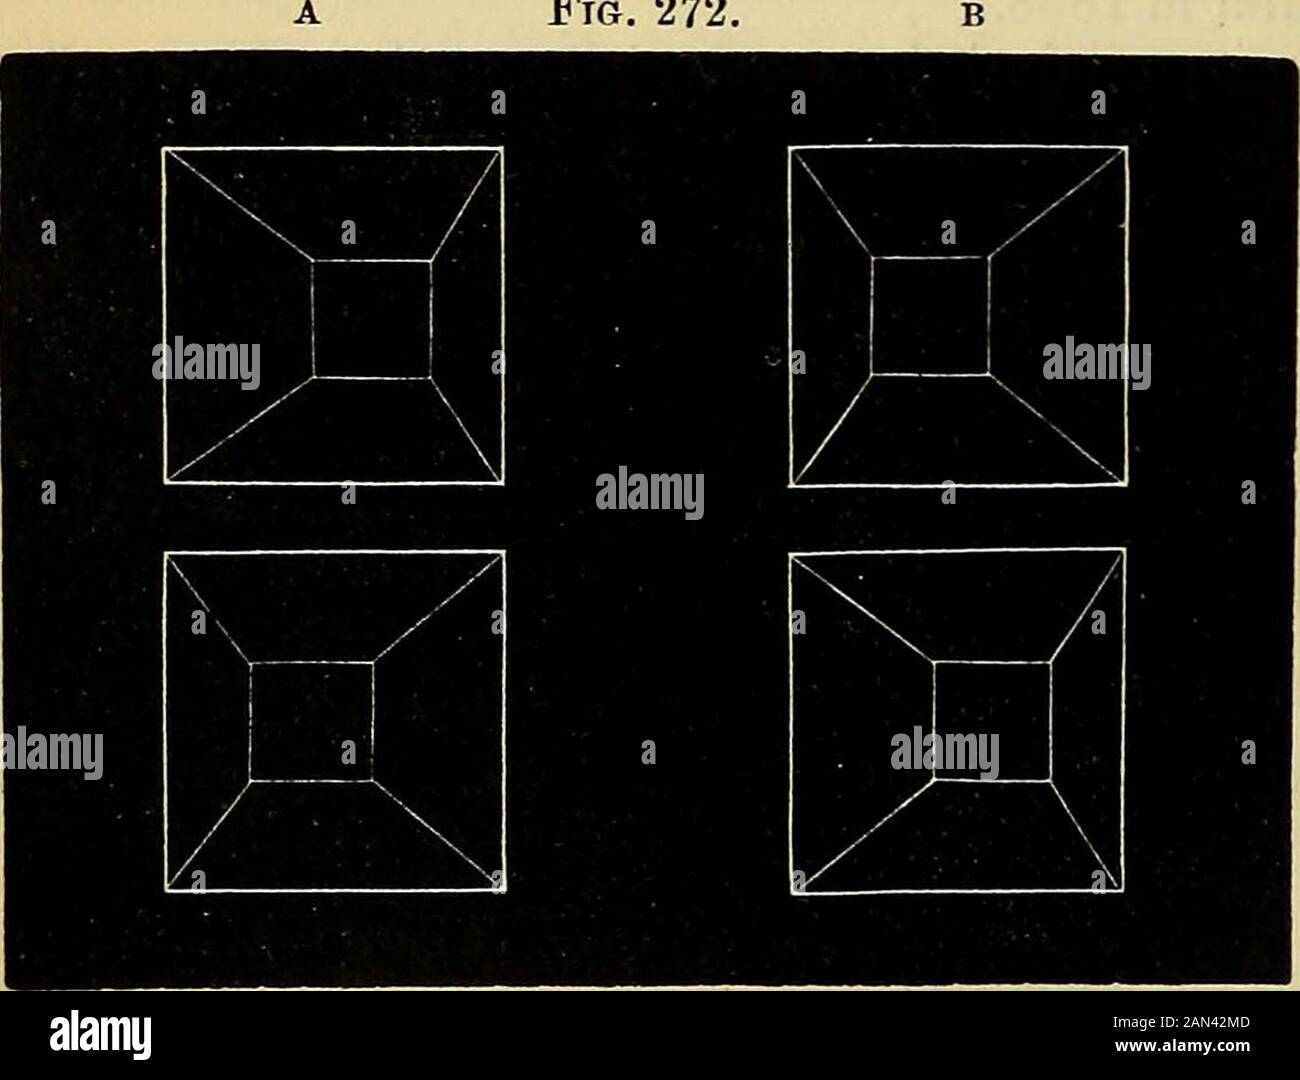 Carpenter's principles of human physiology . in the centre, and the four sides sloping equally towards it. —Prof. Wheatstone hasfurther shown, by meansof the Stereoscope, thatsimilar images, differingto a certain extent inmagnitude, when pre-sented to the correspond-ing parts of the tworetina?, give rise to theperception of a singleobject, intermediate insize between the twomonocular pictures.Were it not for this,objects would appearsingle only when at anc d equal distance from both eyes, so that their pictures upon the retina? are of the same size ; which will nothappen unless they are direct Stock Photo